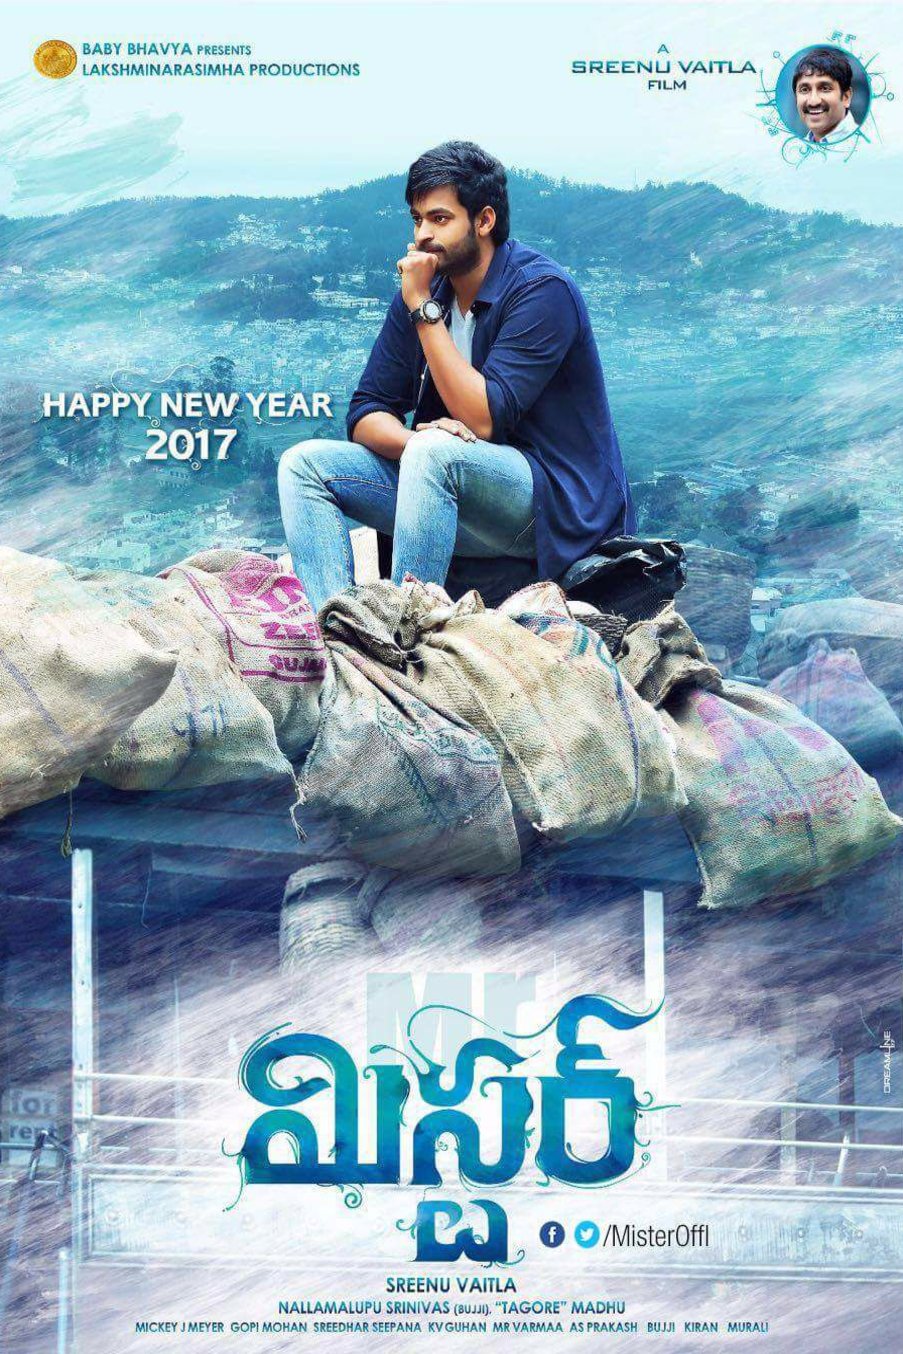 Telugu poster of the movie Mister